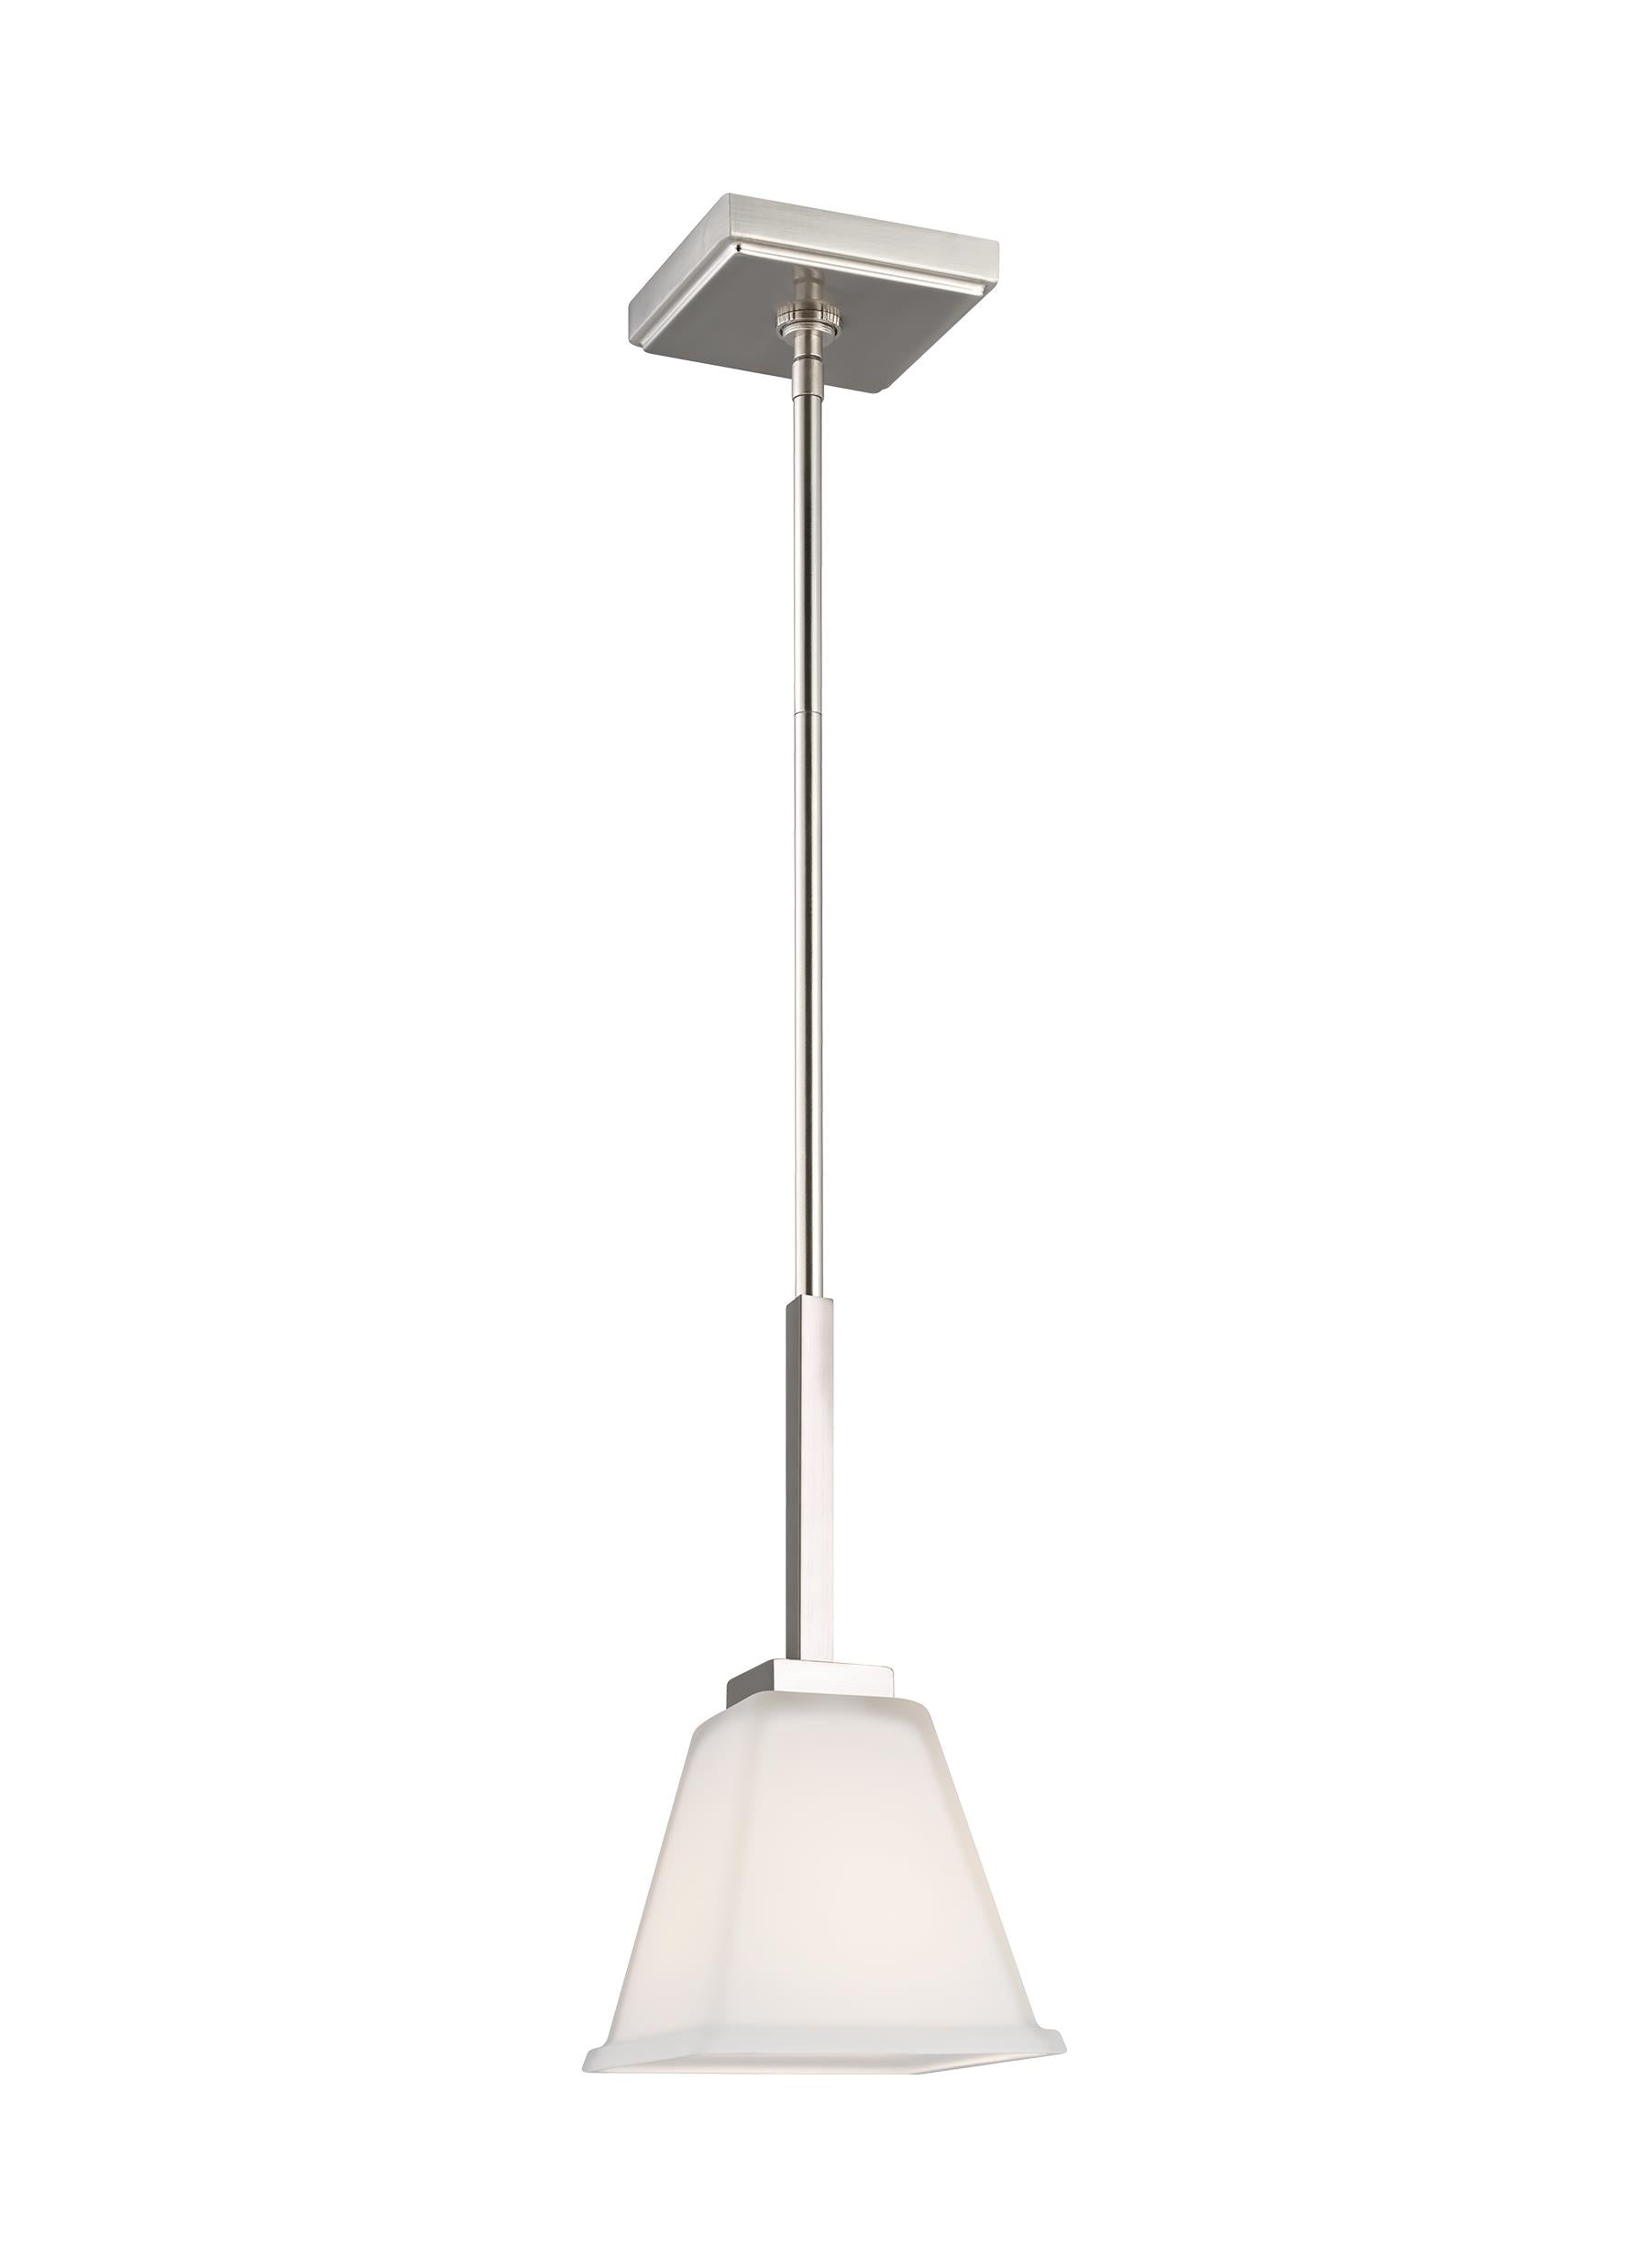 Ellis Harper classic 1-light indoor dimmable ceiling hanging single pendant light in brushed nickel silver finish with etc...